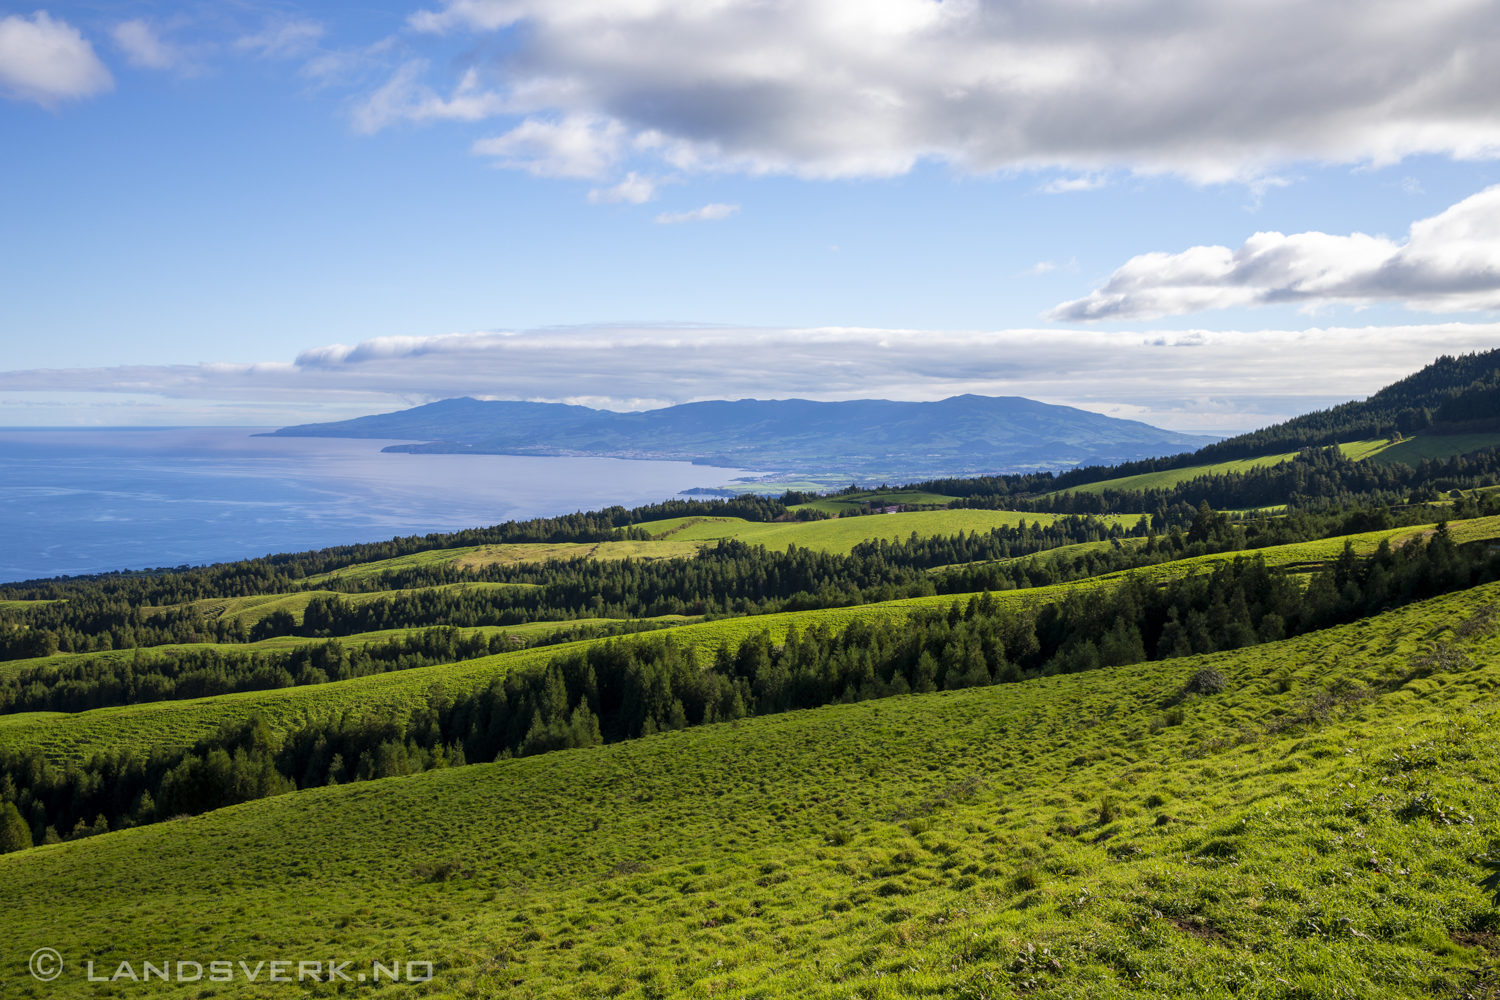 São Miguel, Azores. (Canon EOS 5D Mark IV / Canon EF 24-70mm f/2.8 L II USM)